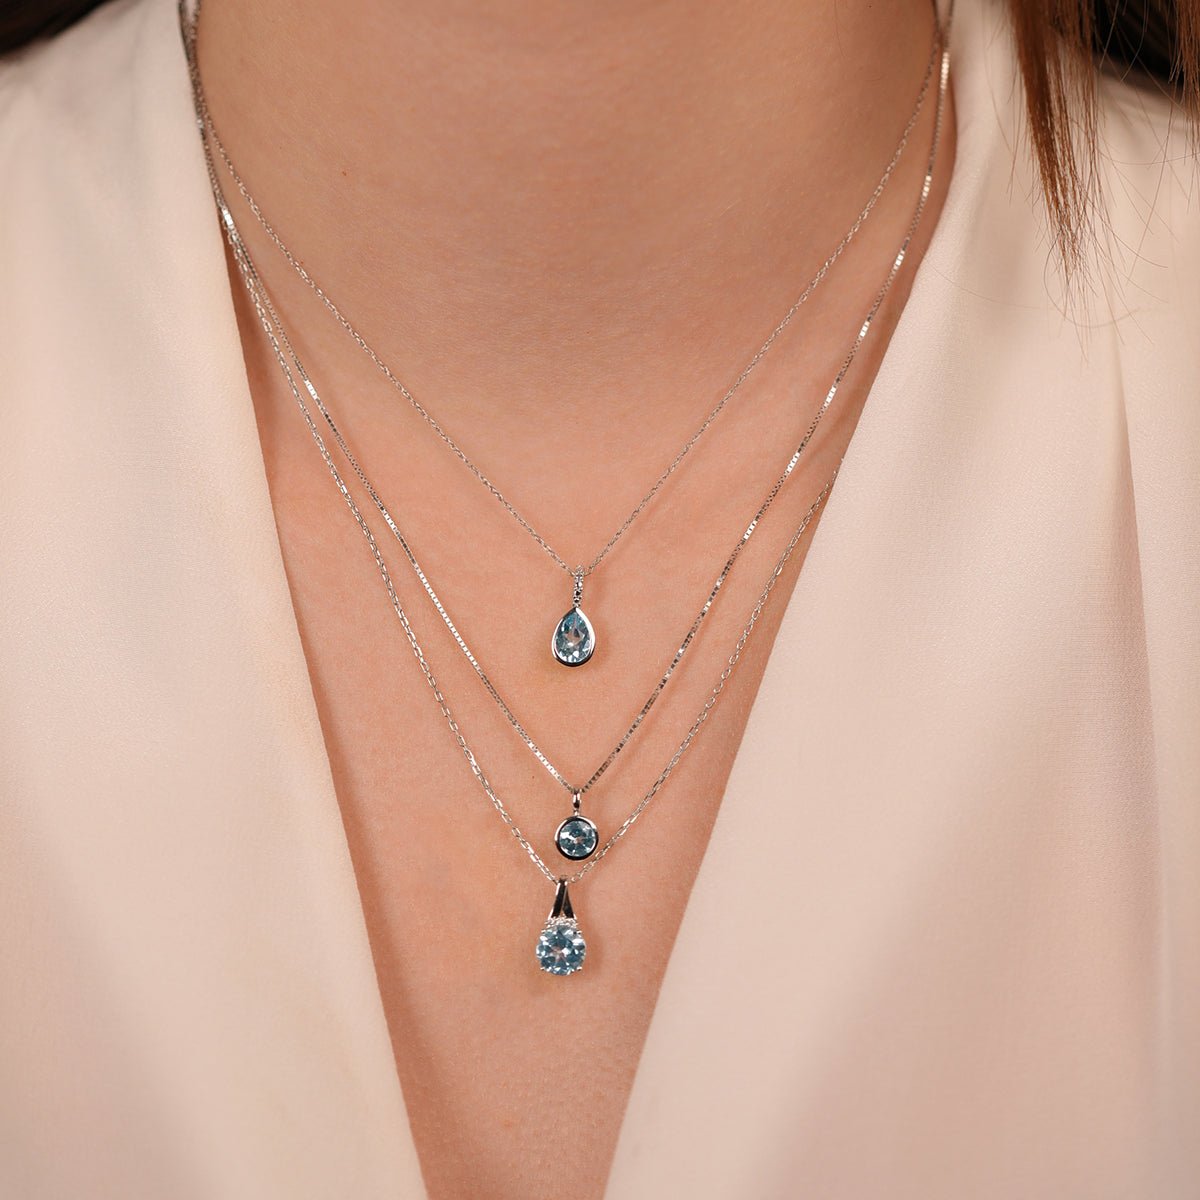 Round Blue Topaz Pendant Necklace with Diamonds Necklaces Estella Collection #product_description# 14k Birthstone Blue Gemstone #tag4# #tag5# #tag6# #tag7# #tag8# #tag9# #tag10#